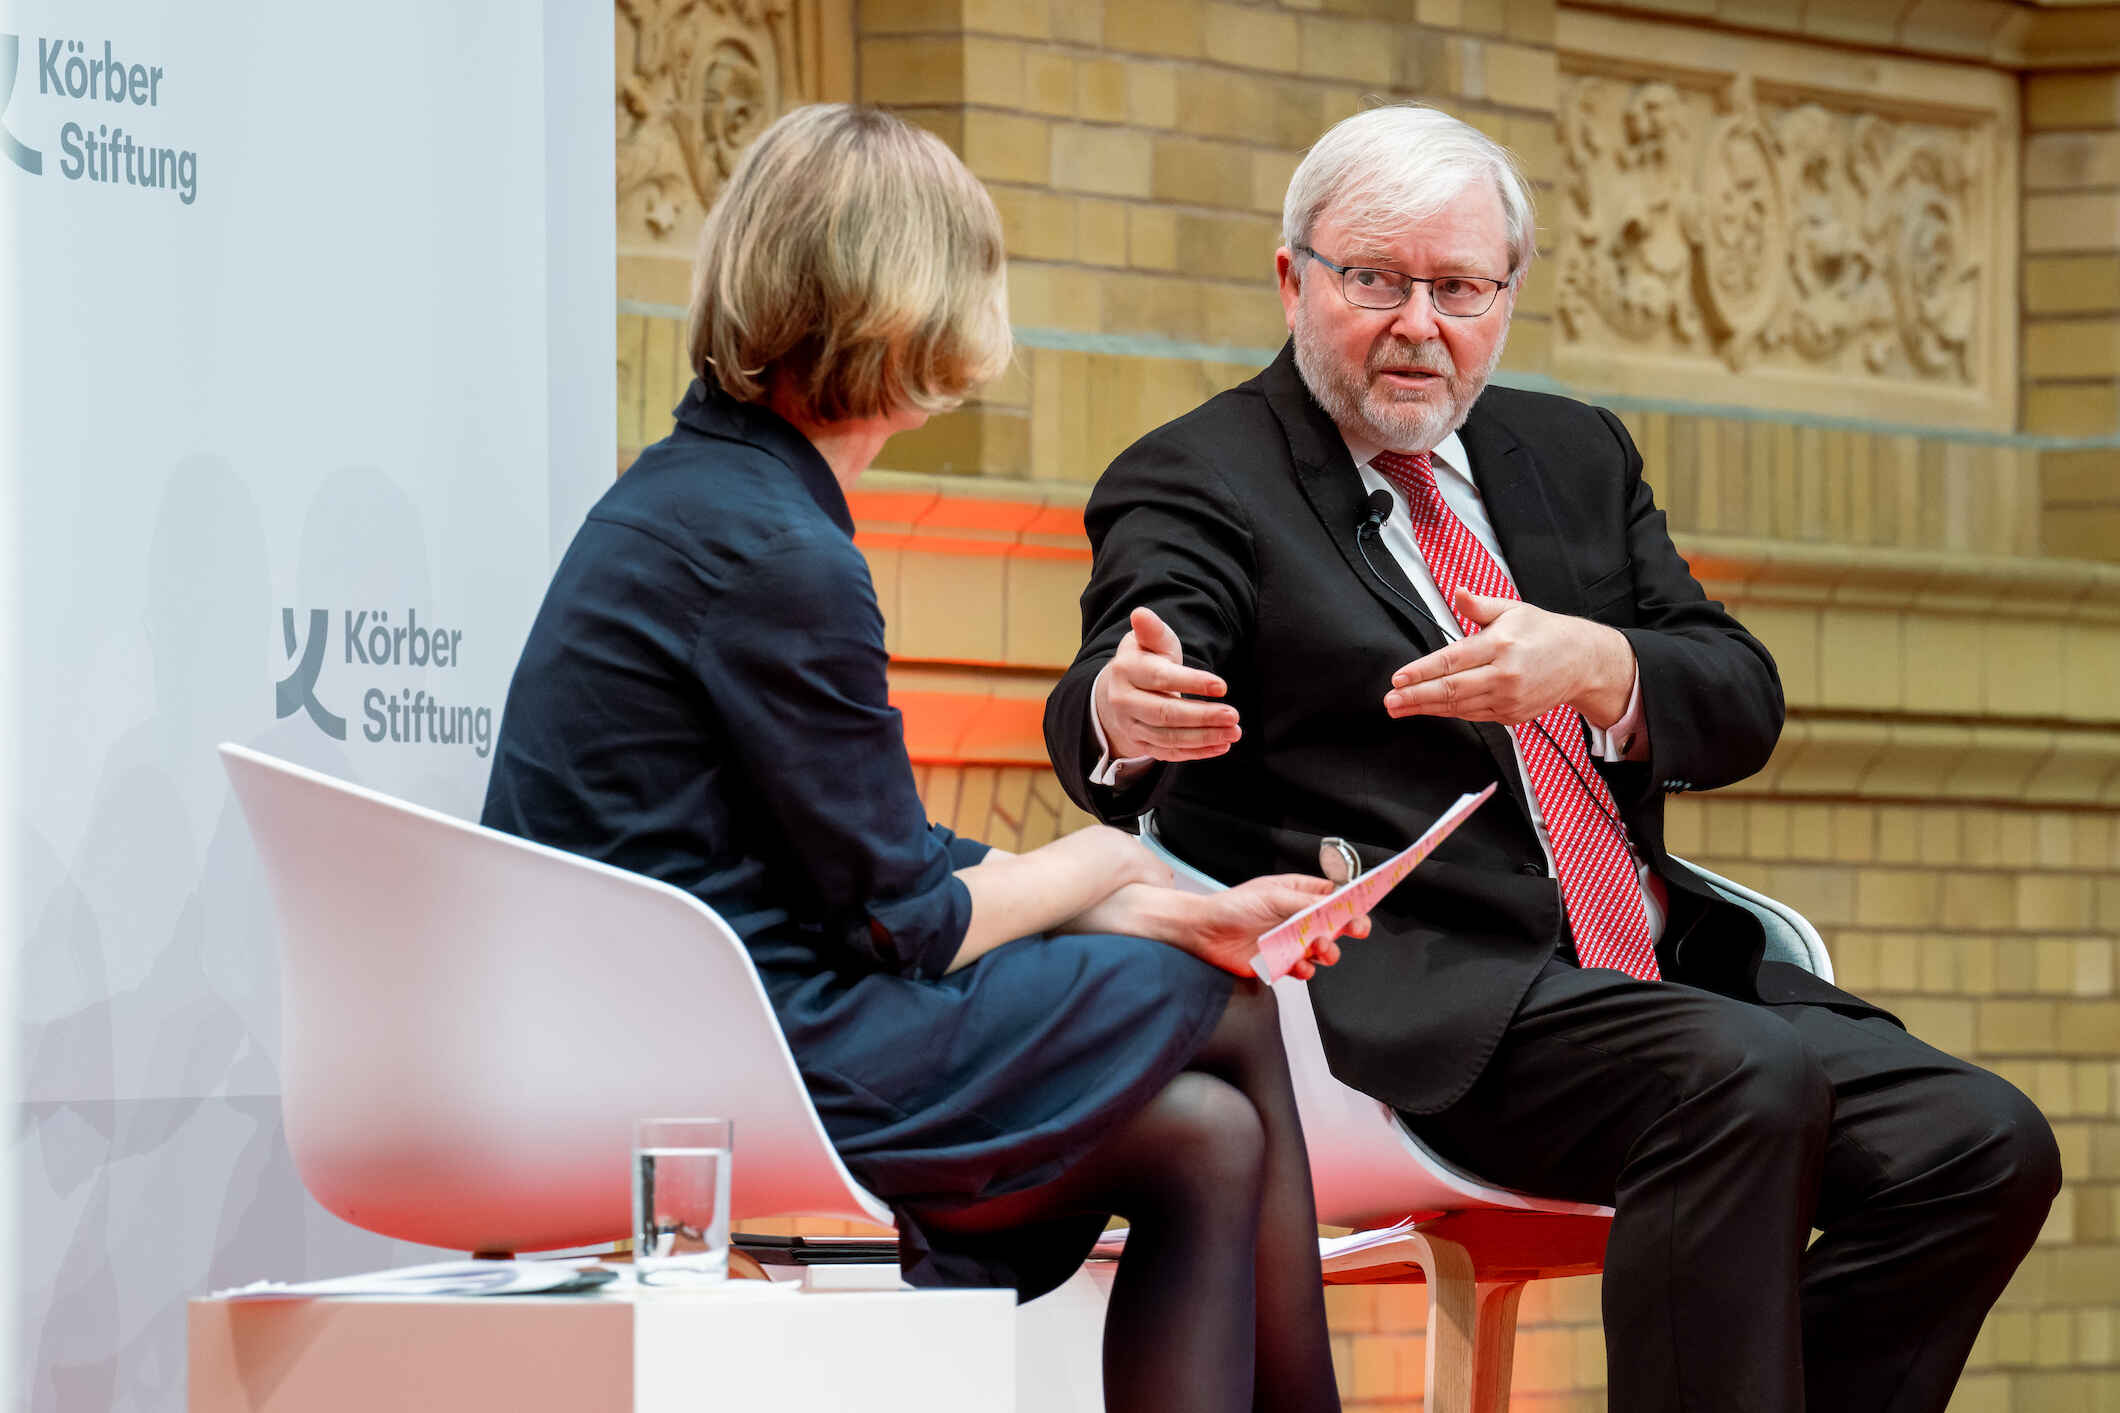 Kevin Rudd, former Prime Minister, Commonwealth of Australia and President; Chief Executive, Asia Society Policy Institute, New York